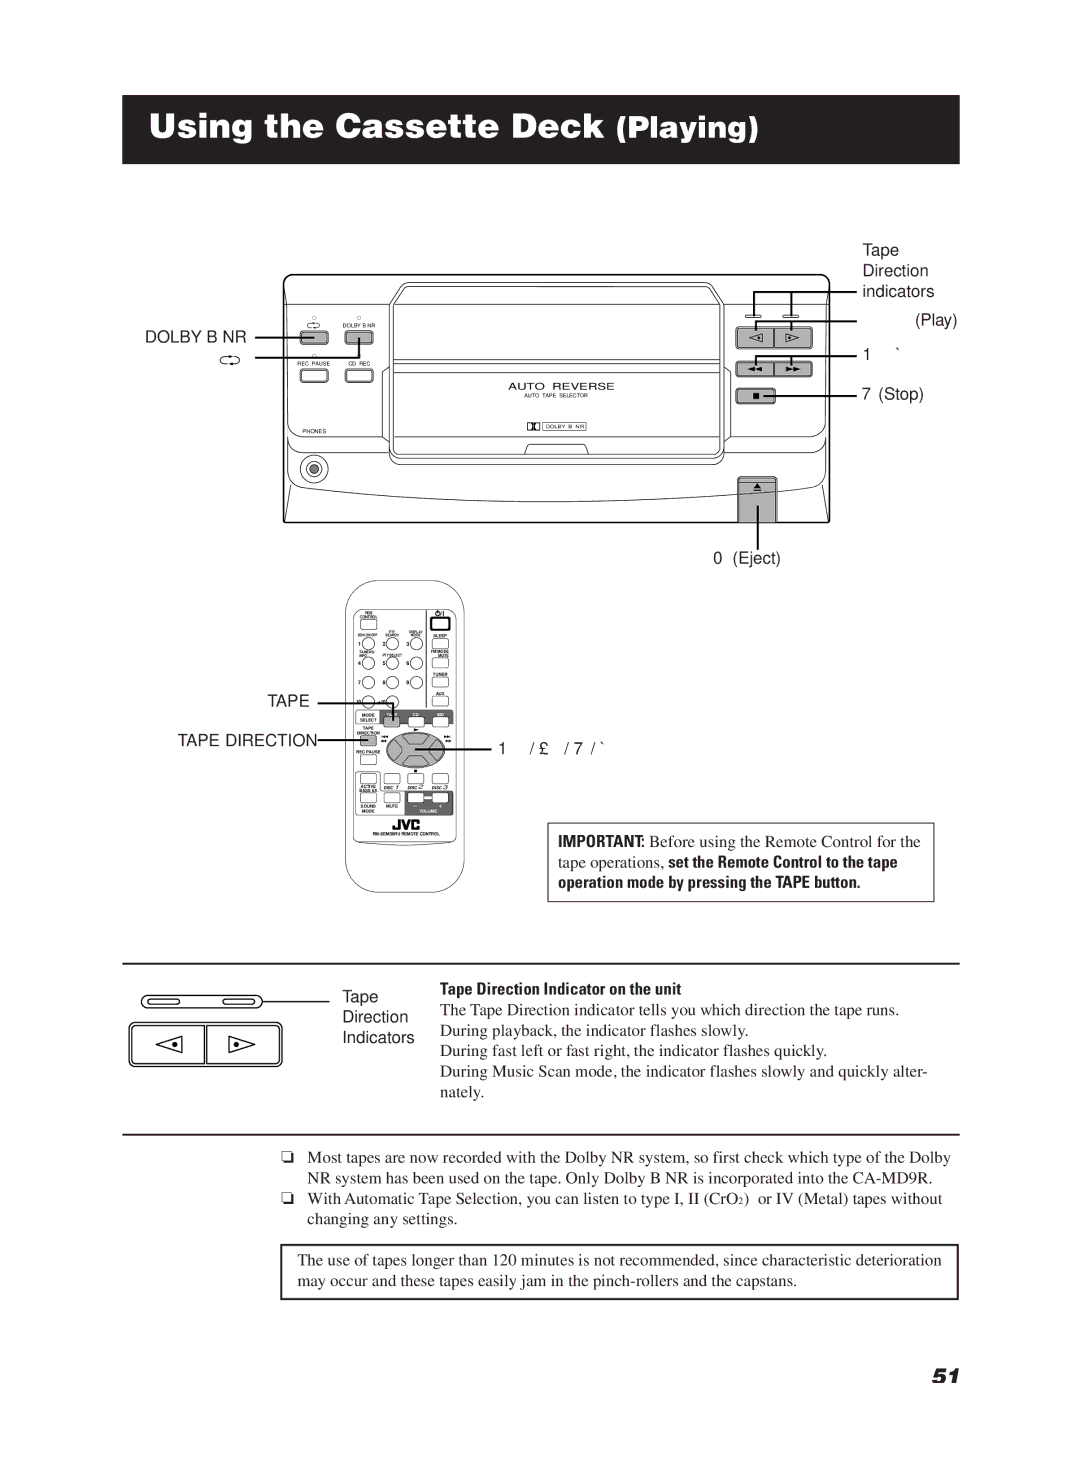 JVC CA-MD9R manual Using the Cassette Deck Playing, Tape Direction Indicator on the unit 